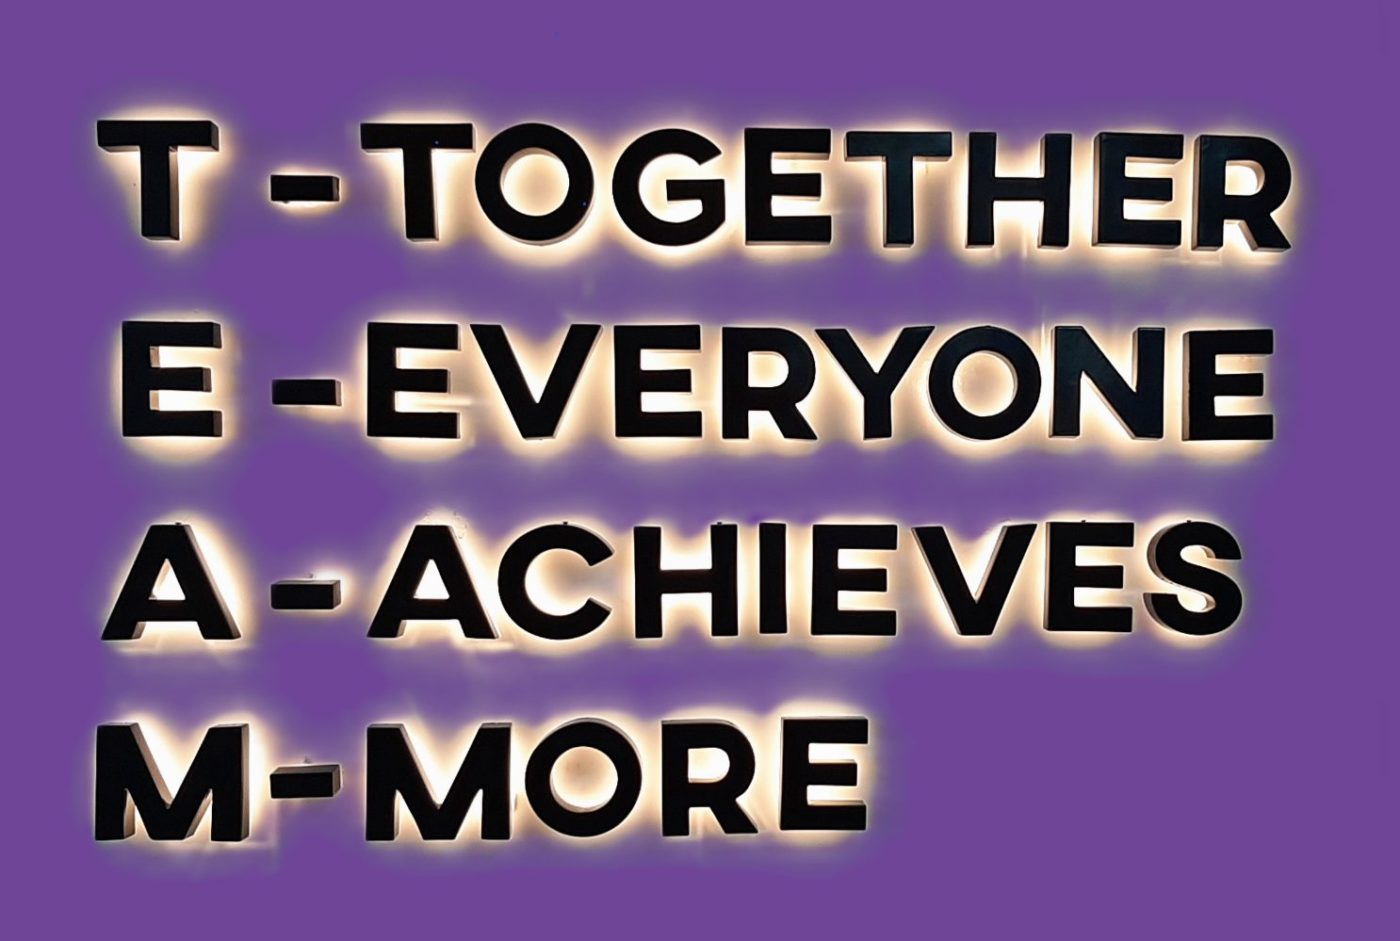 An image showing an illuminated mnemonic for TEAM on a liolac background - Together Everyone Achieves More